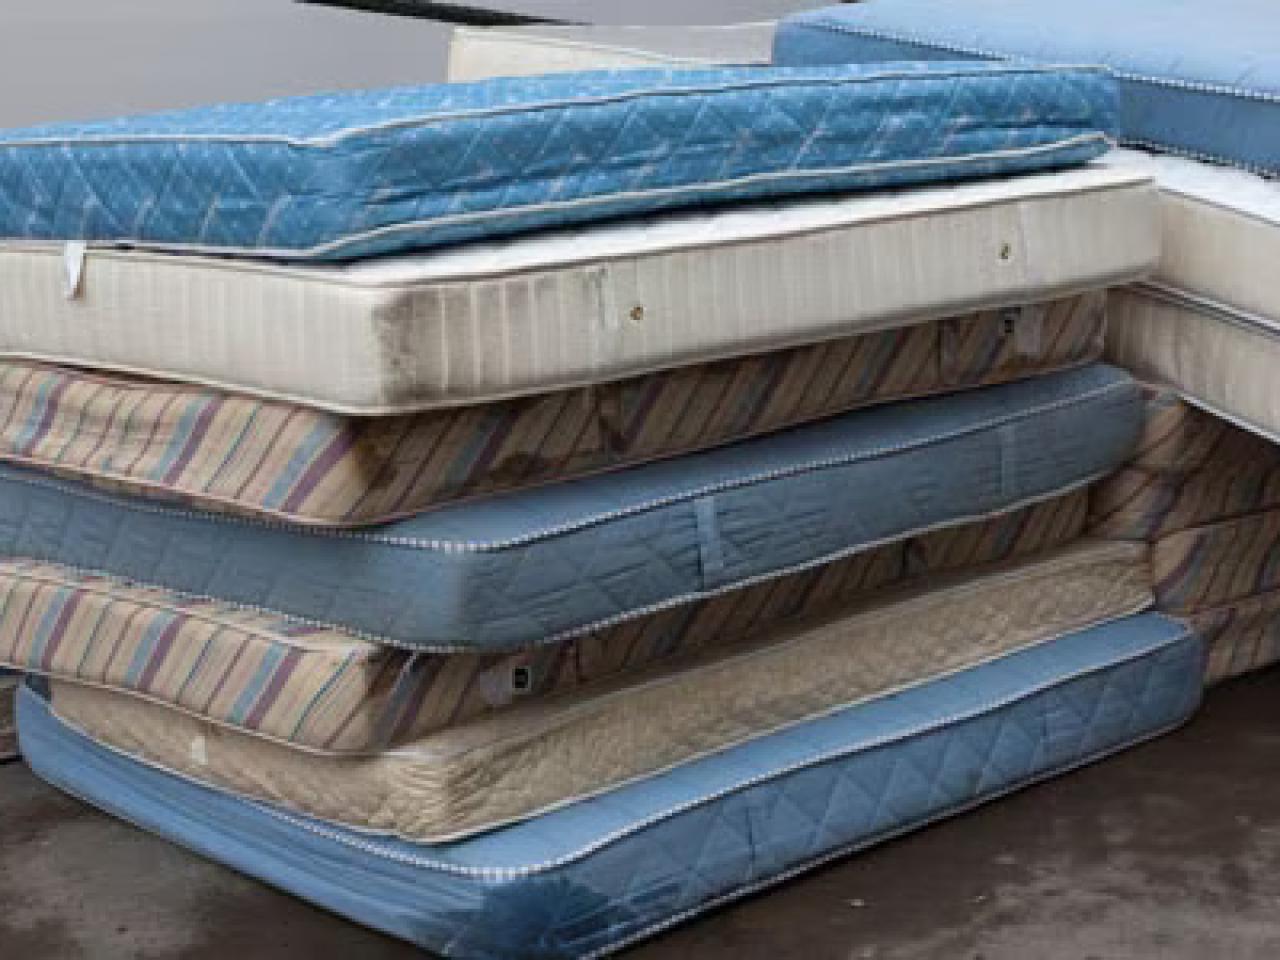 Piles of old mattresses